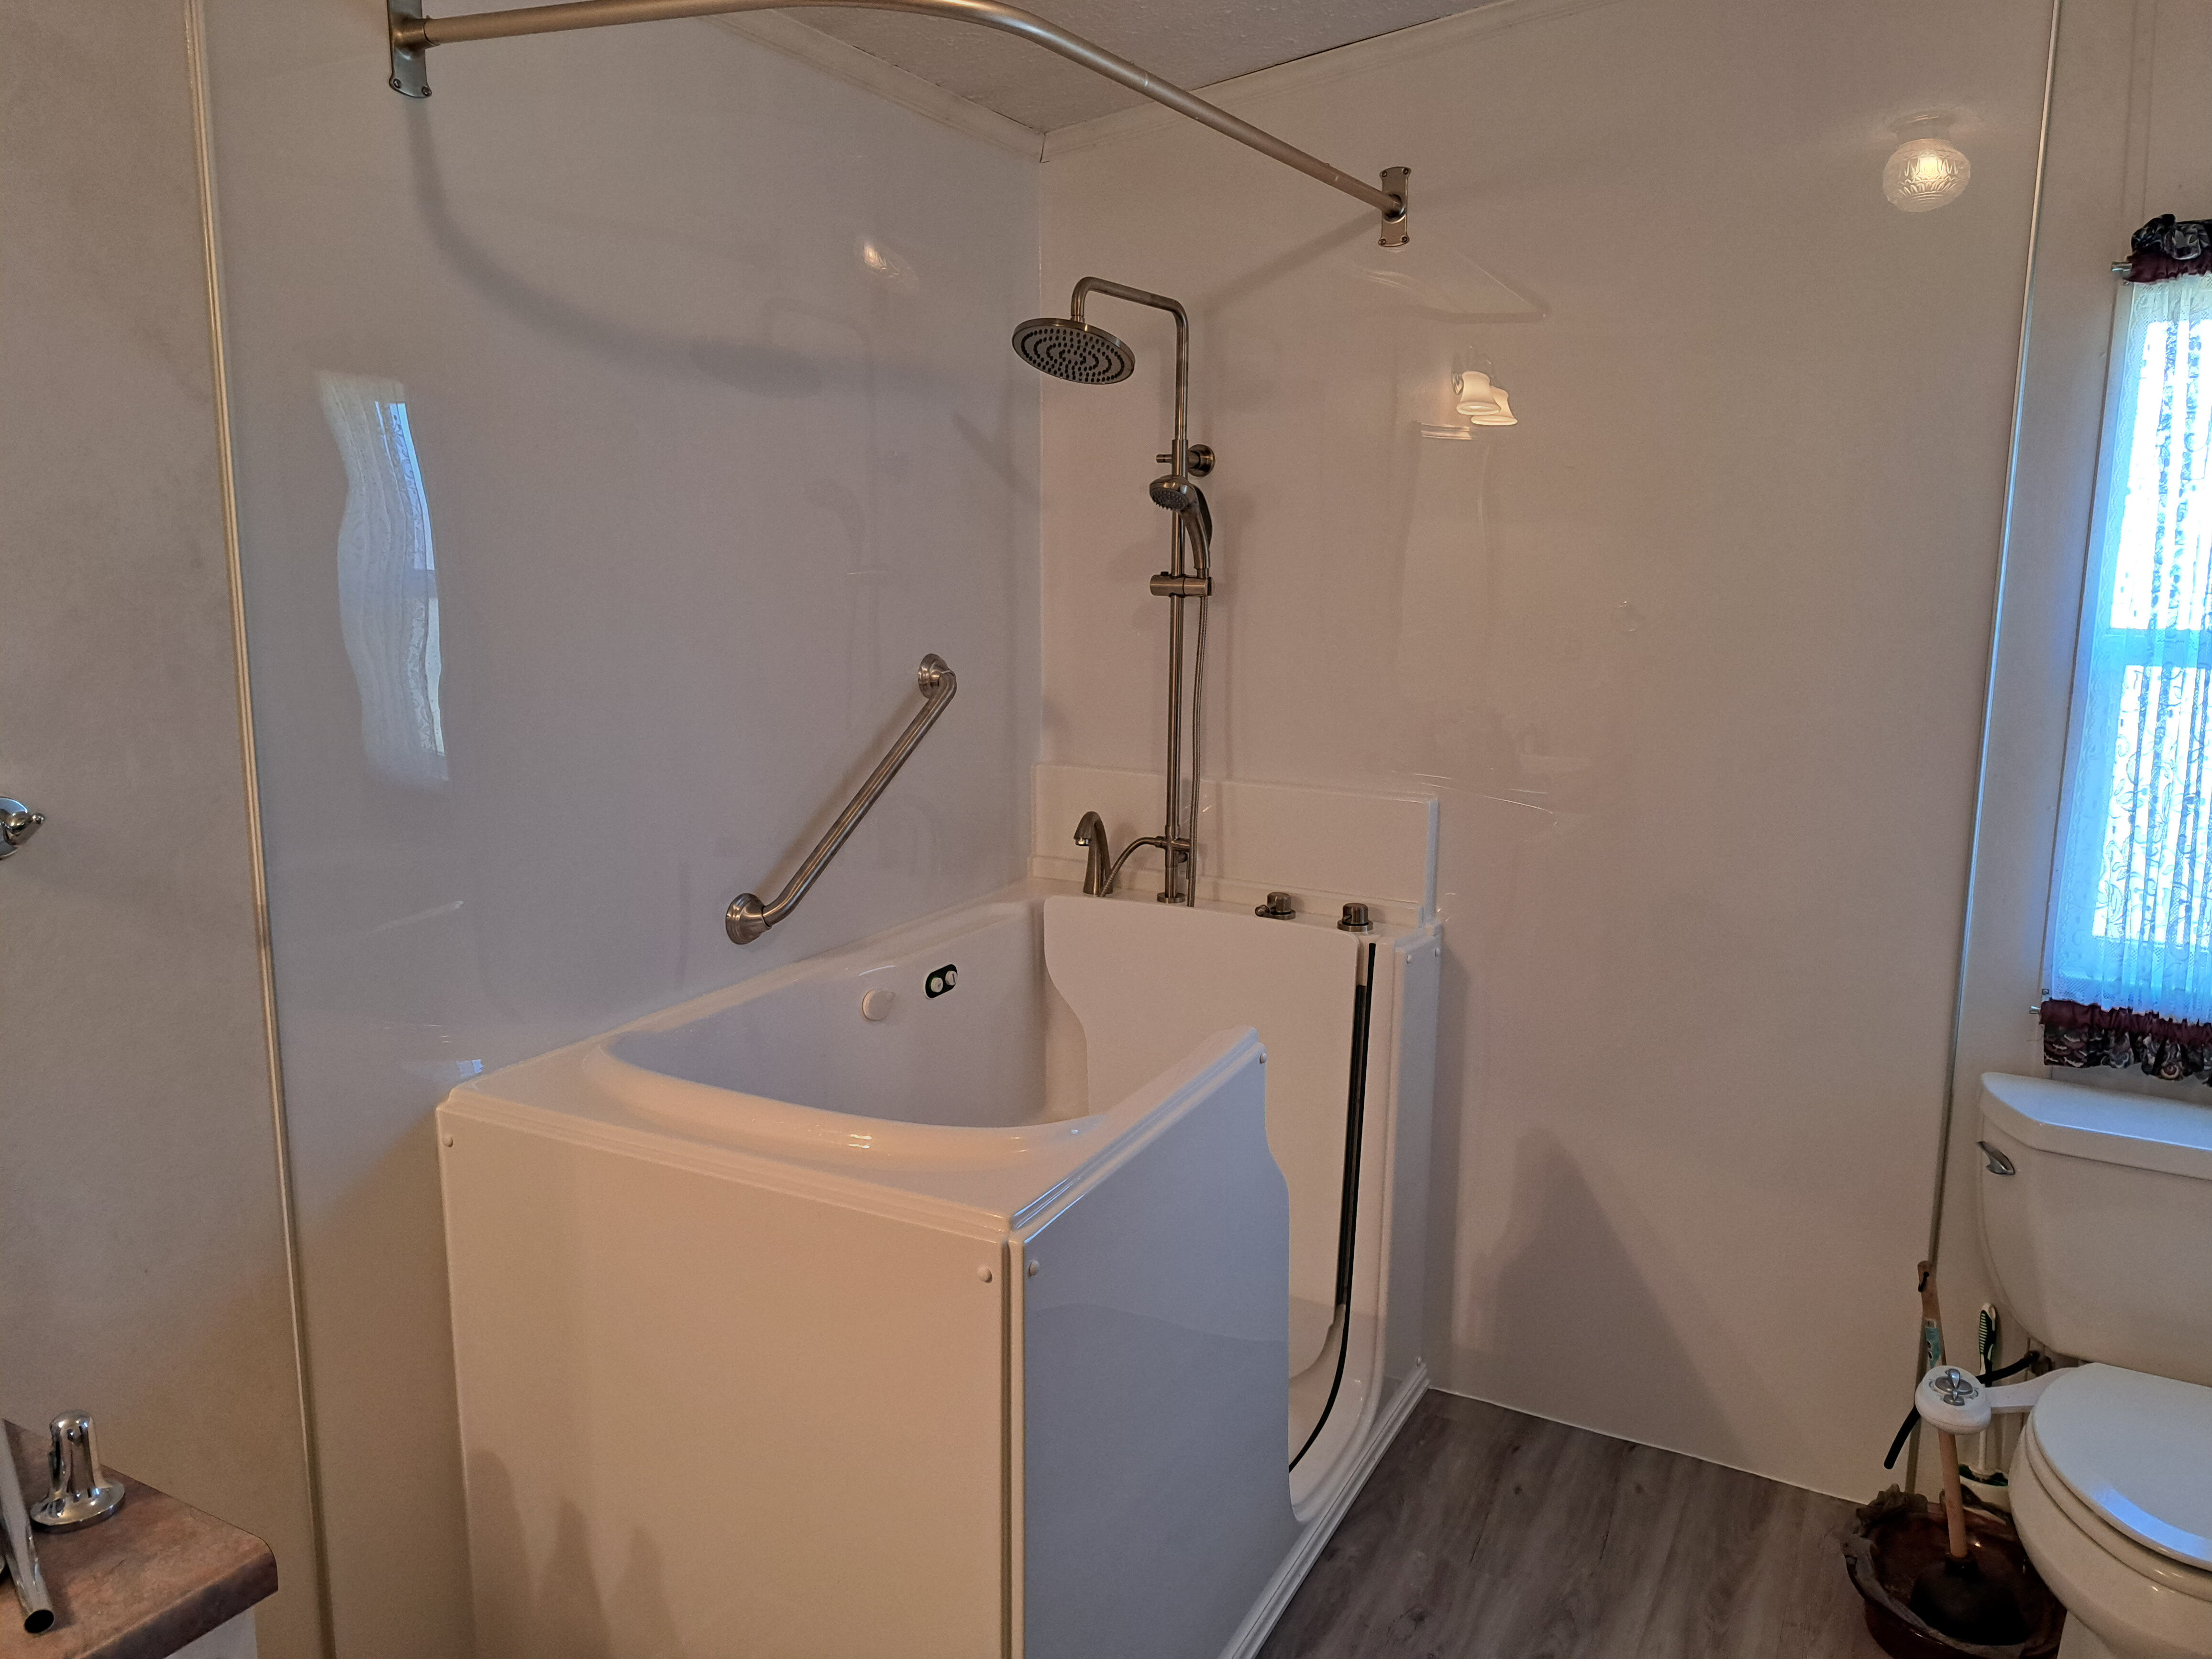 New walk in tub with shower head